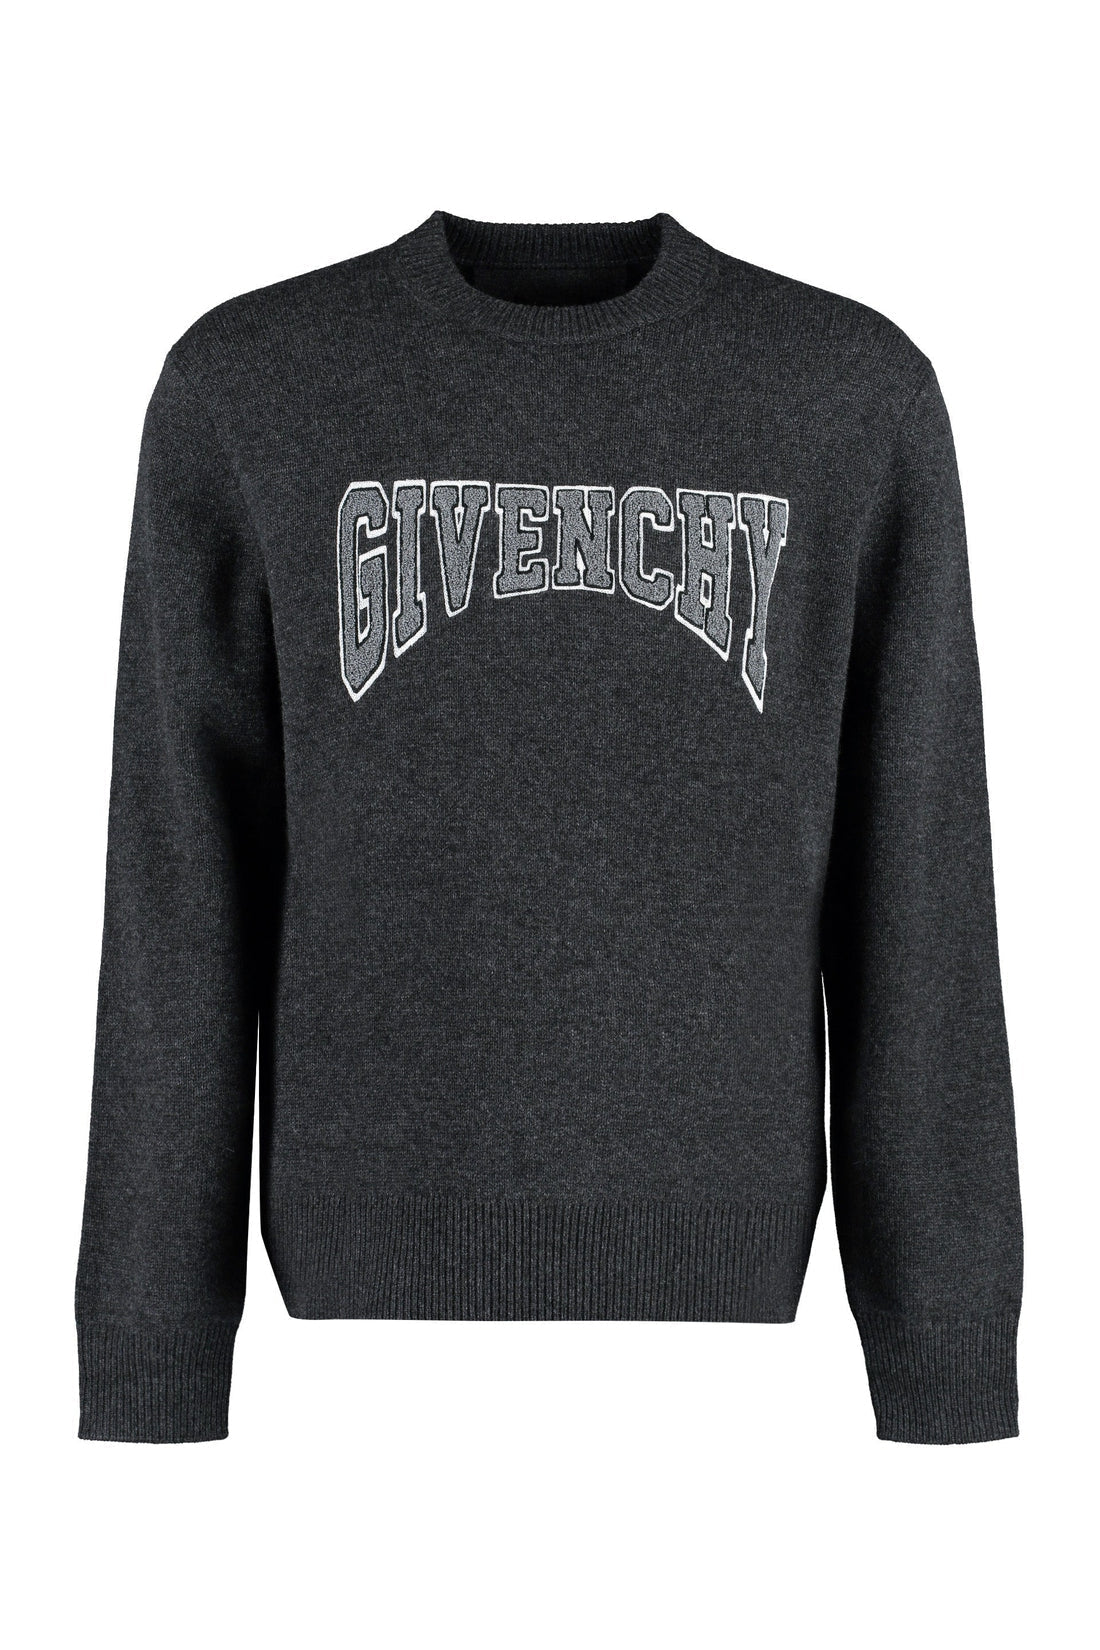 Givenchy-OUTLET-SALE-Crew-neck wool sweater-ARCHIVIST